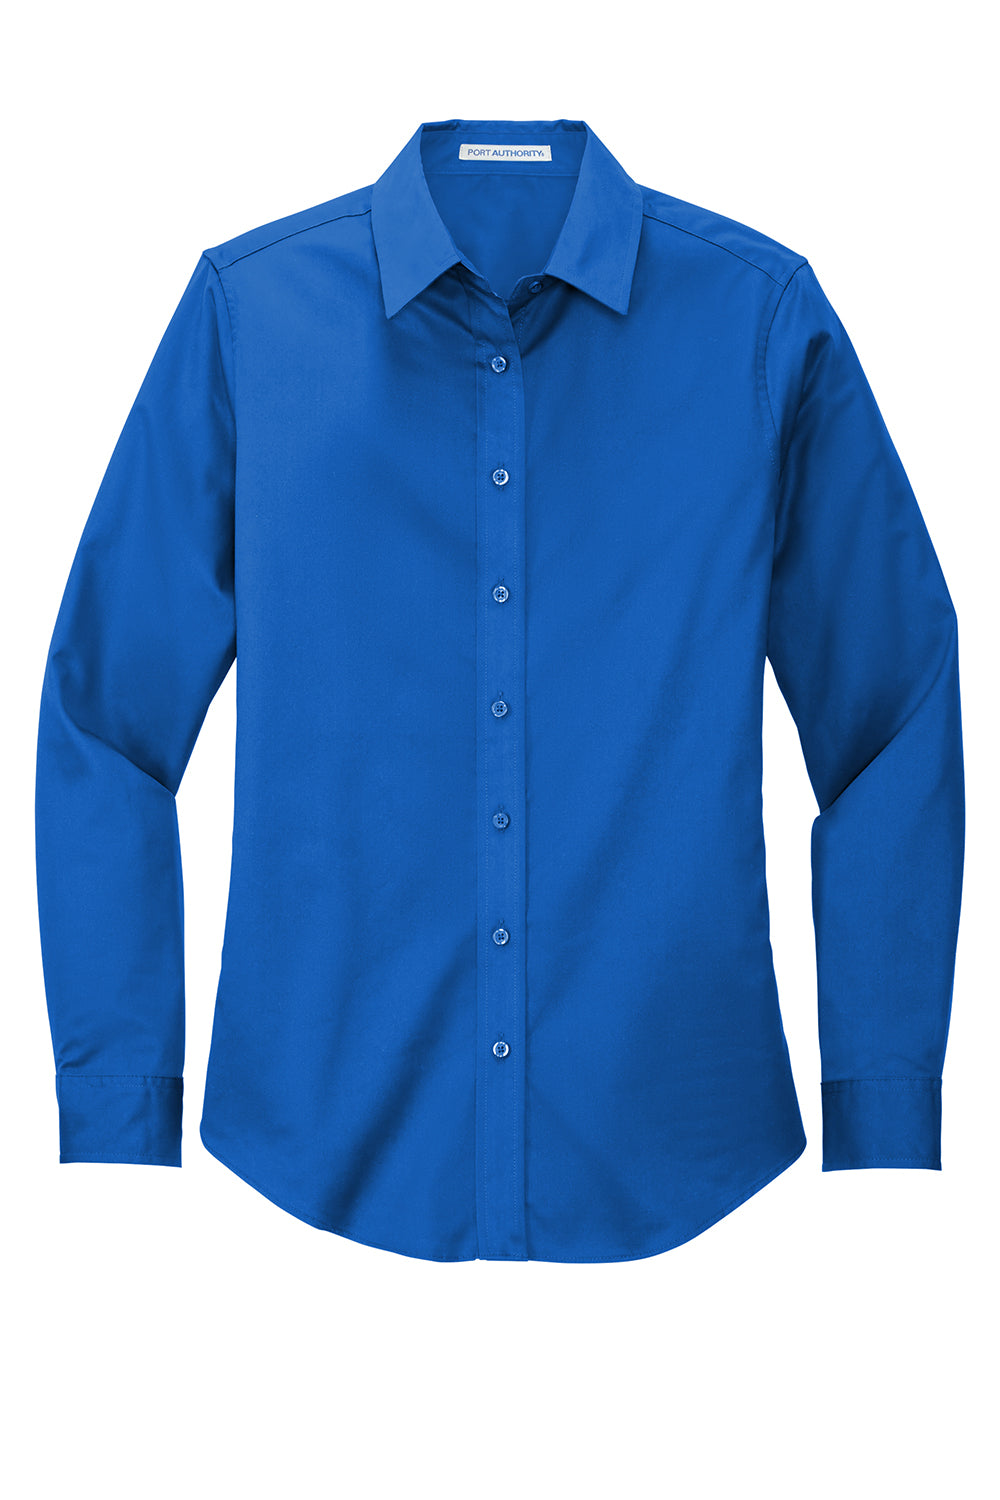 Port Authority L608 Womens Easy Care Wrinkle Resistant Long Sleeve Button Down Shirt Strong Blue Flat Front